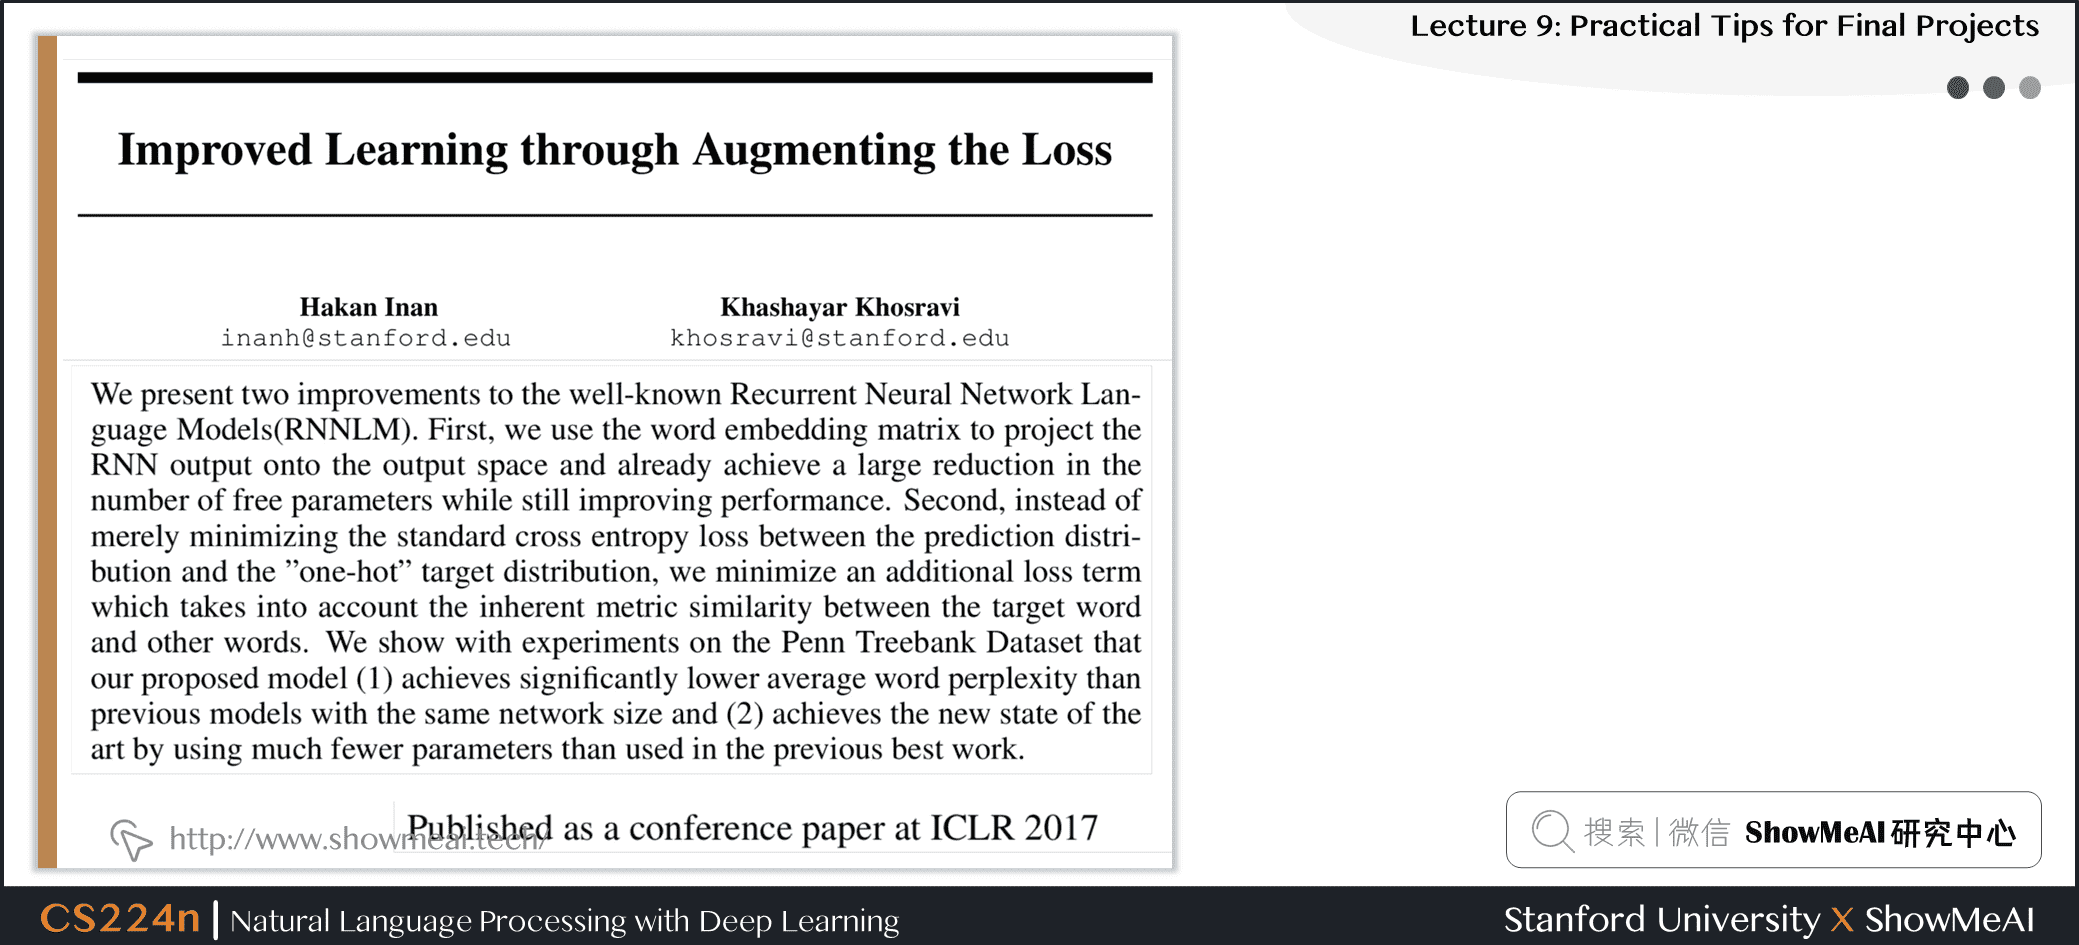 Improved Learning through Augmenting the Loss